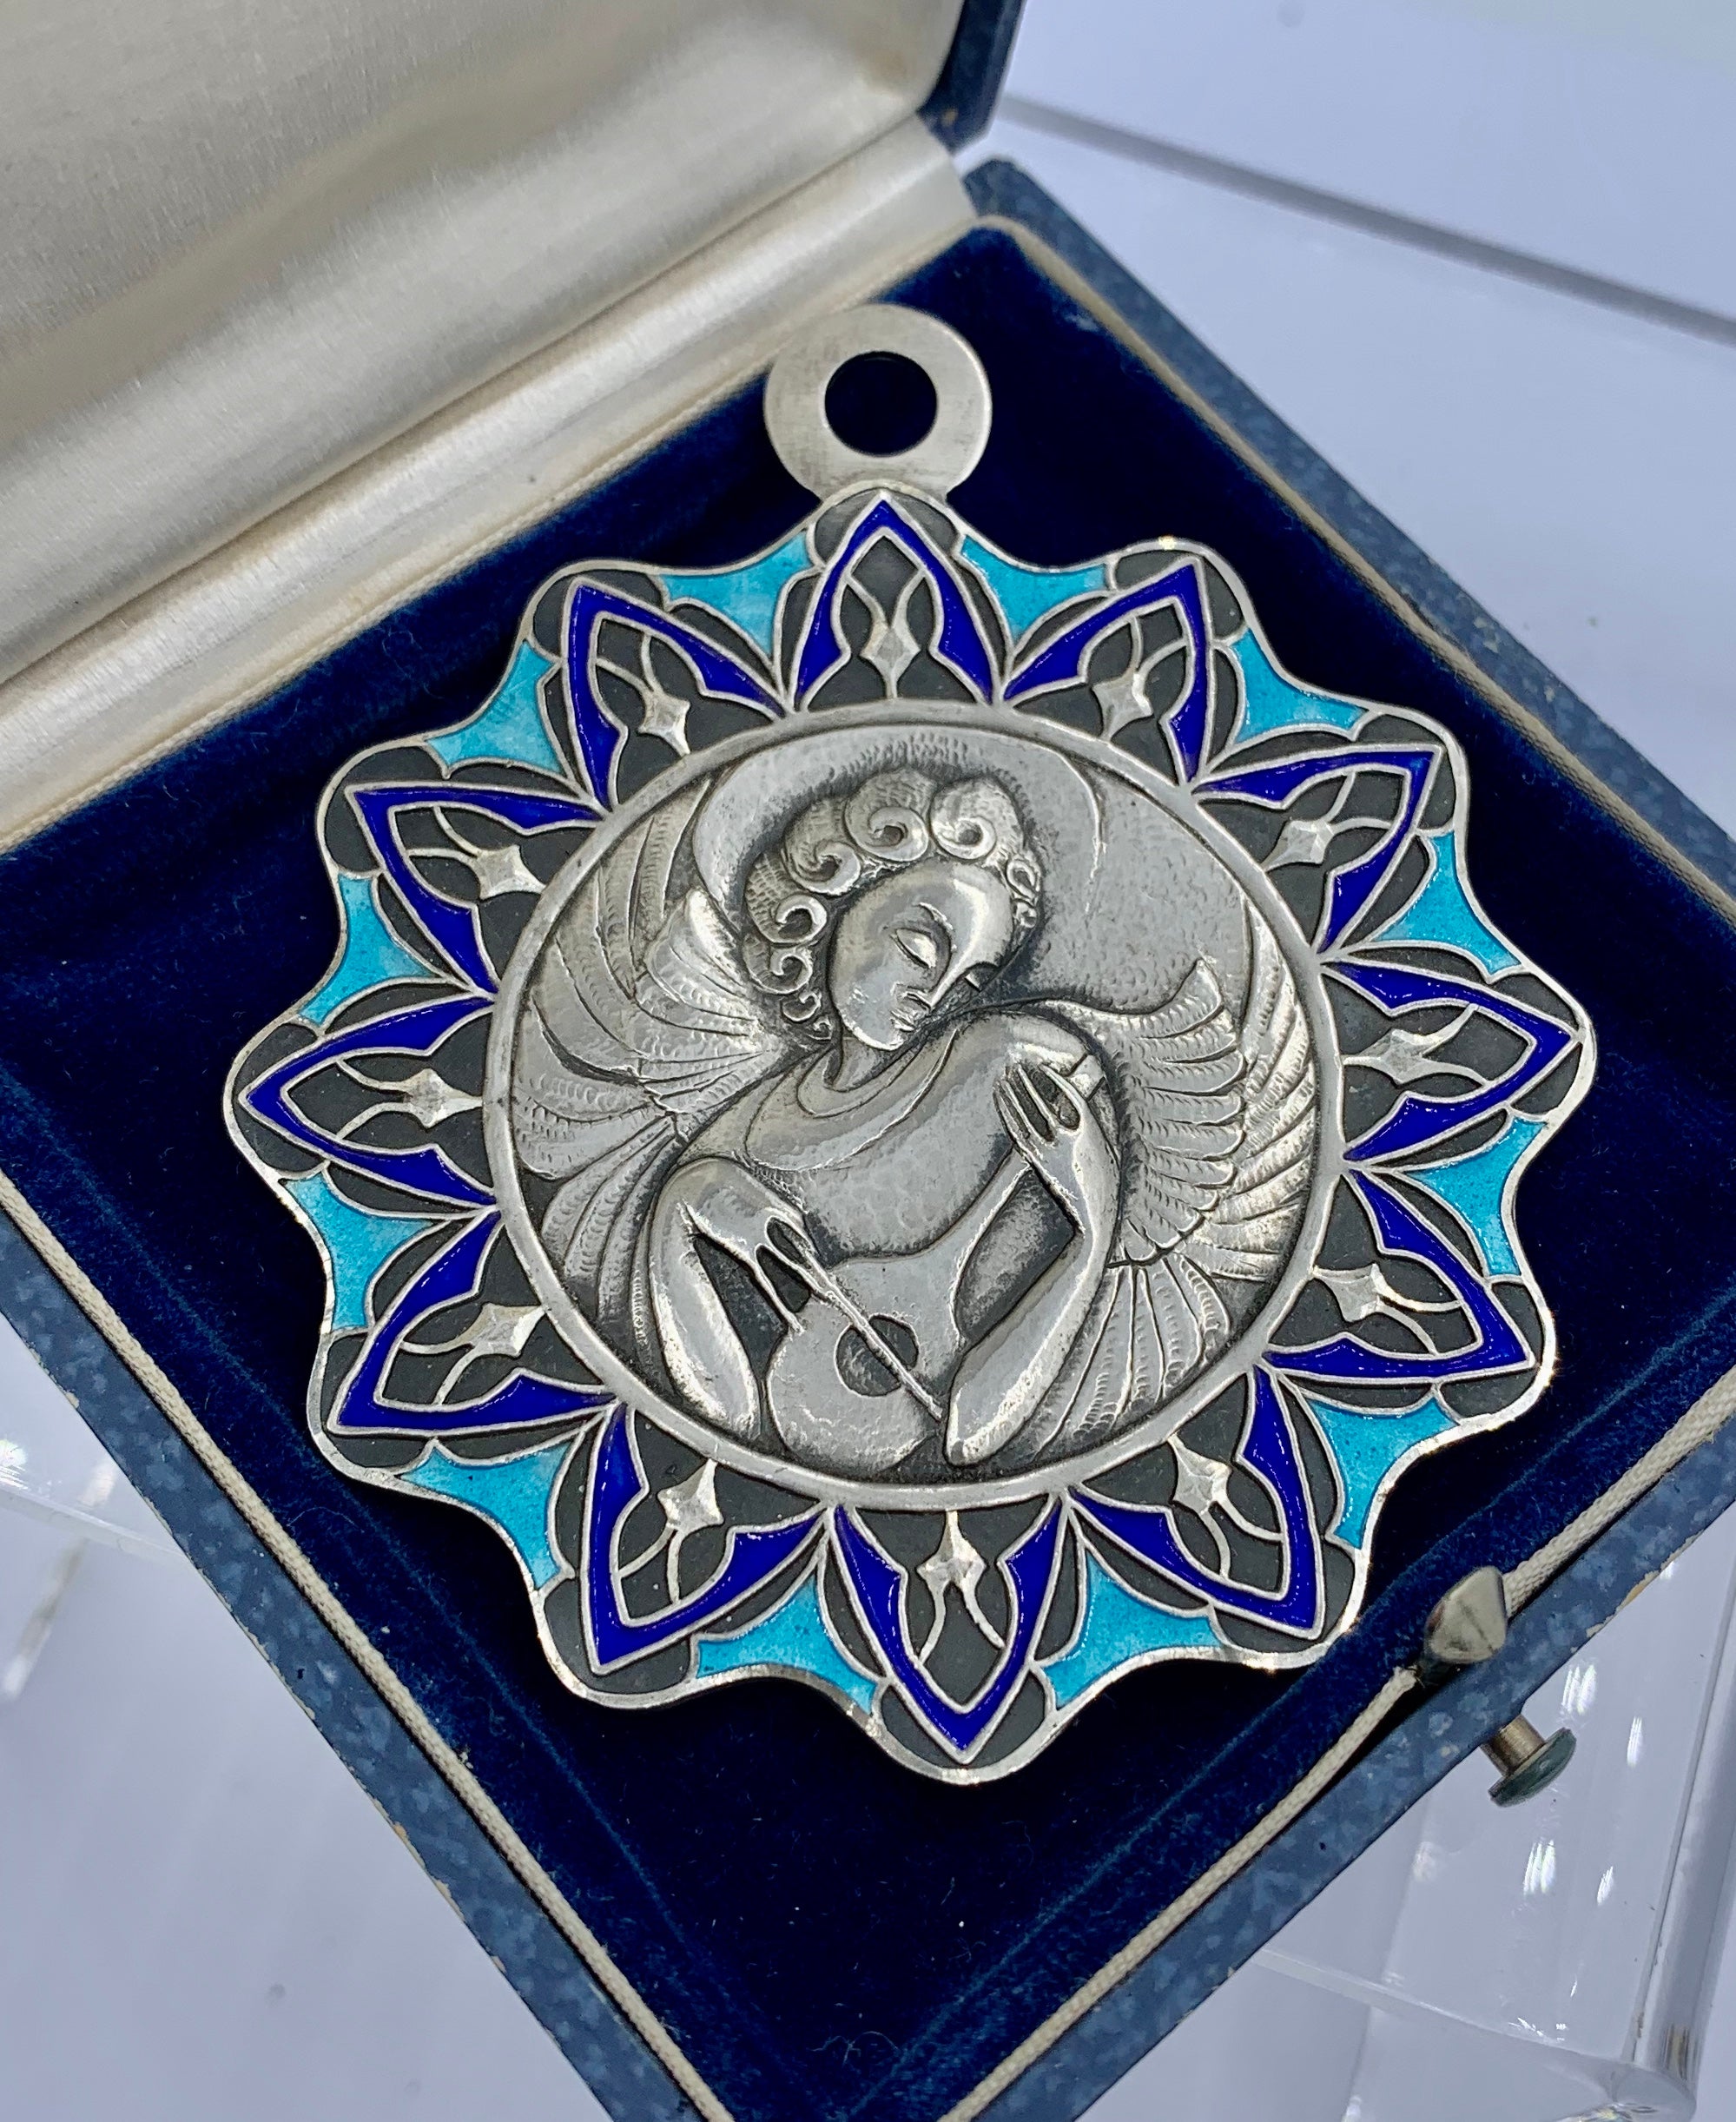 THIS IS ONE OF THE MOST BEAUTIFUL AND RARE ANTIQUE ENAMEL JEWELS WE HAVE SEEN.  THE ART NOUVEAU, MODERNIST PENDANT HAS AN EXQUISITE IMAGE OF AN ANGEL PLAYING A MUSICAL STRINGED INSTRUMENT.  THE DESIGN OF THE ANGEL IS AN EXTRAORDINARY MODERNIST